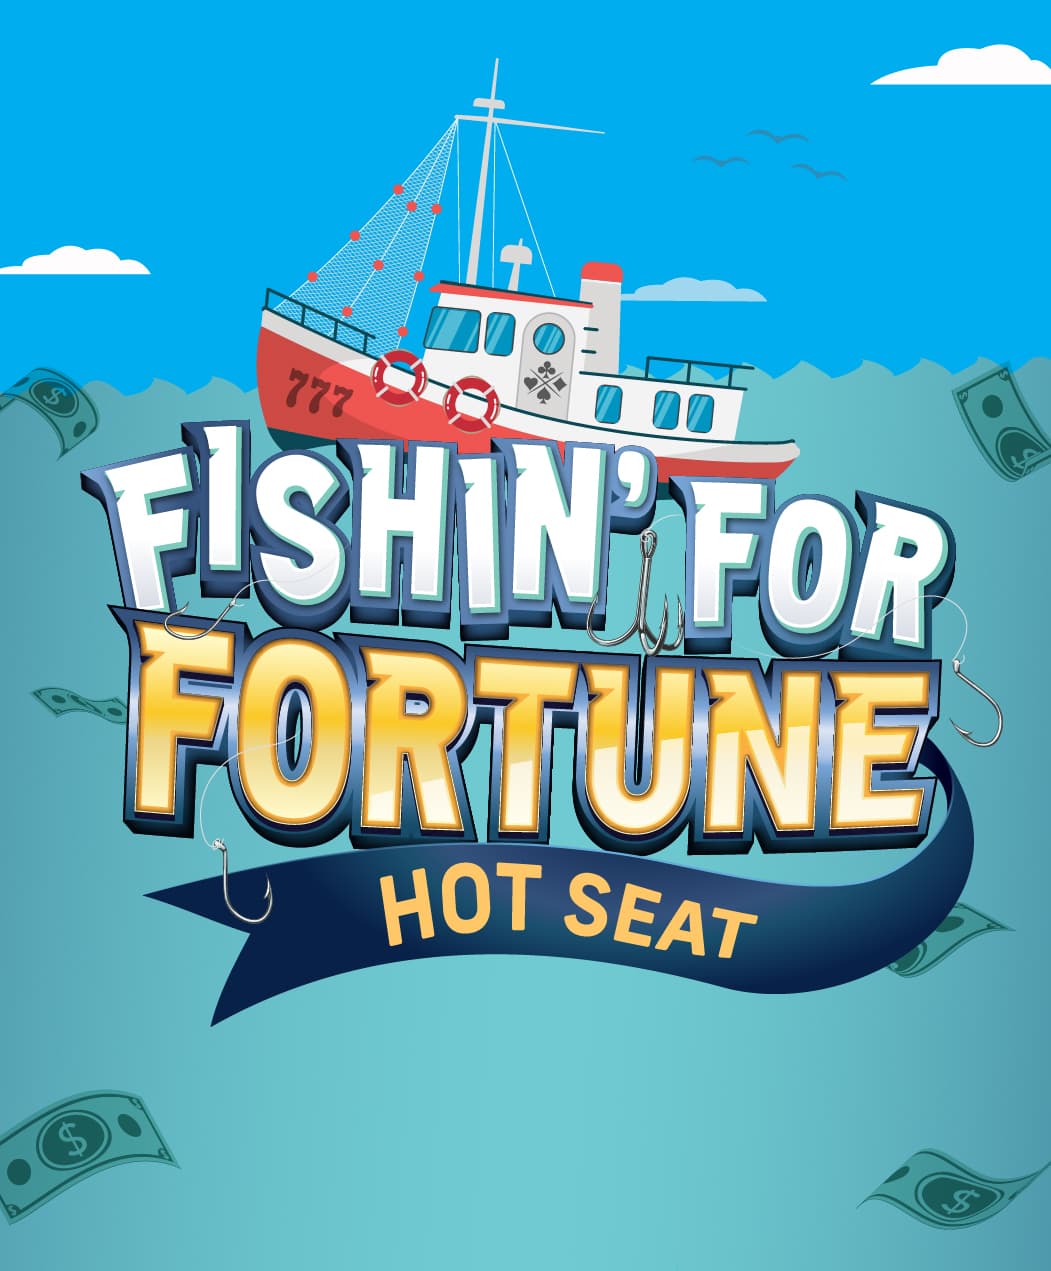 Fishin' for Fortune Hot Seat